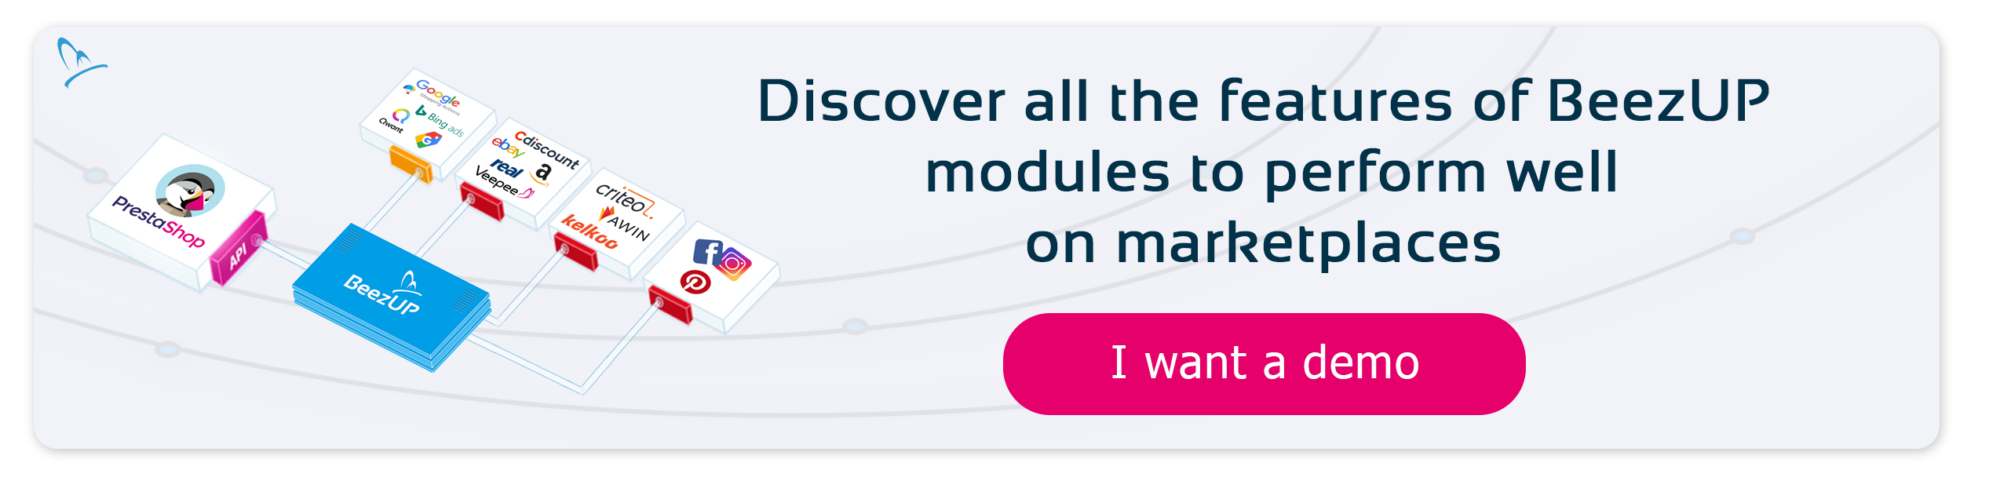 Discover all the features of BeezUP modules to perform well on marketplaces